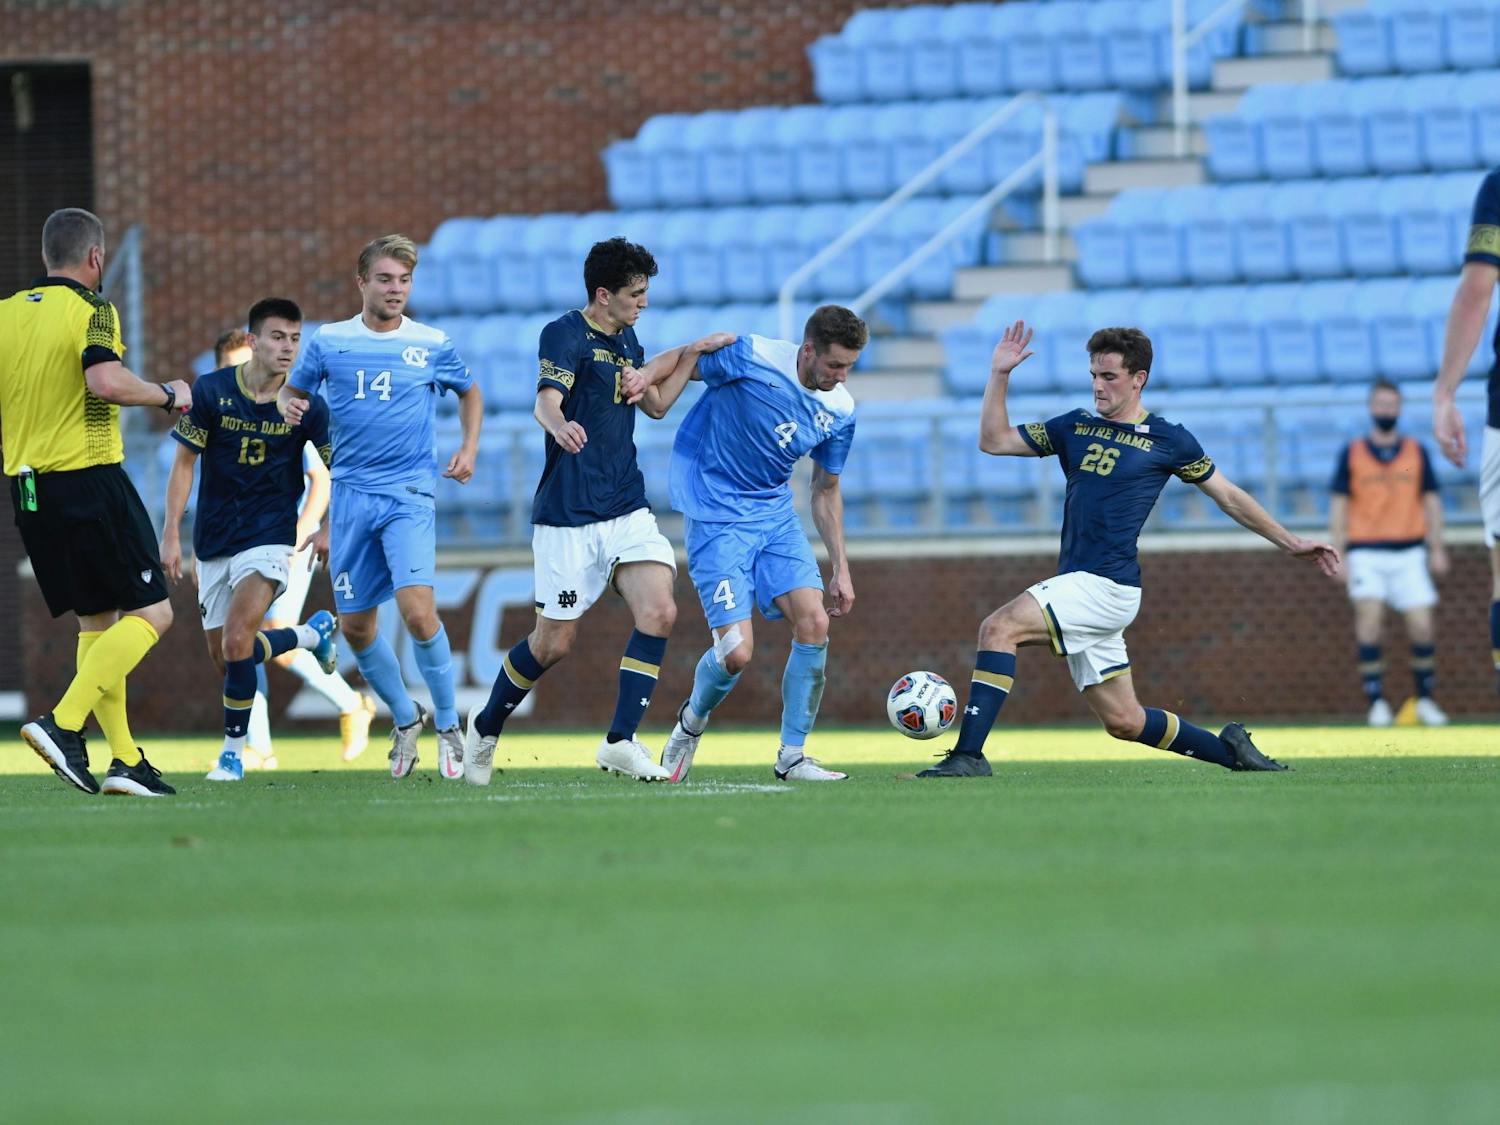 UNC's men's soccer team faced off against Notre Dame in the first round of the ACC tournament on Sunday, Nov. 14, 2020 in Dorrance Field. UNC fell to Notre Dame 1-0. Photo courtesy of Dana Gentry for UNC Athletic Communications. 